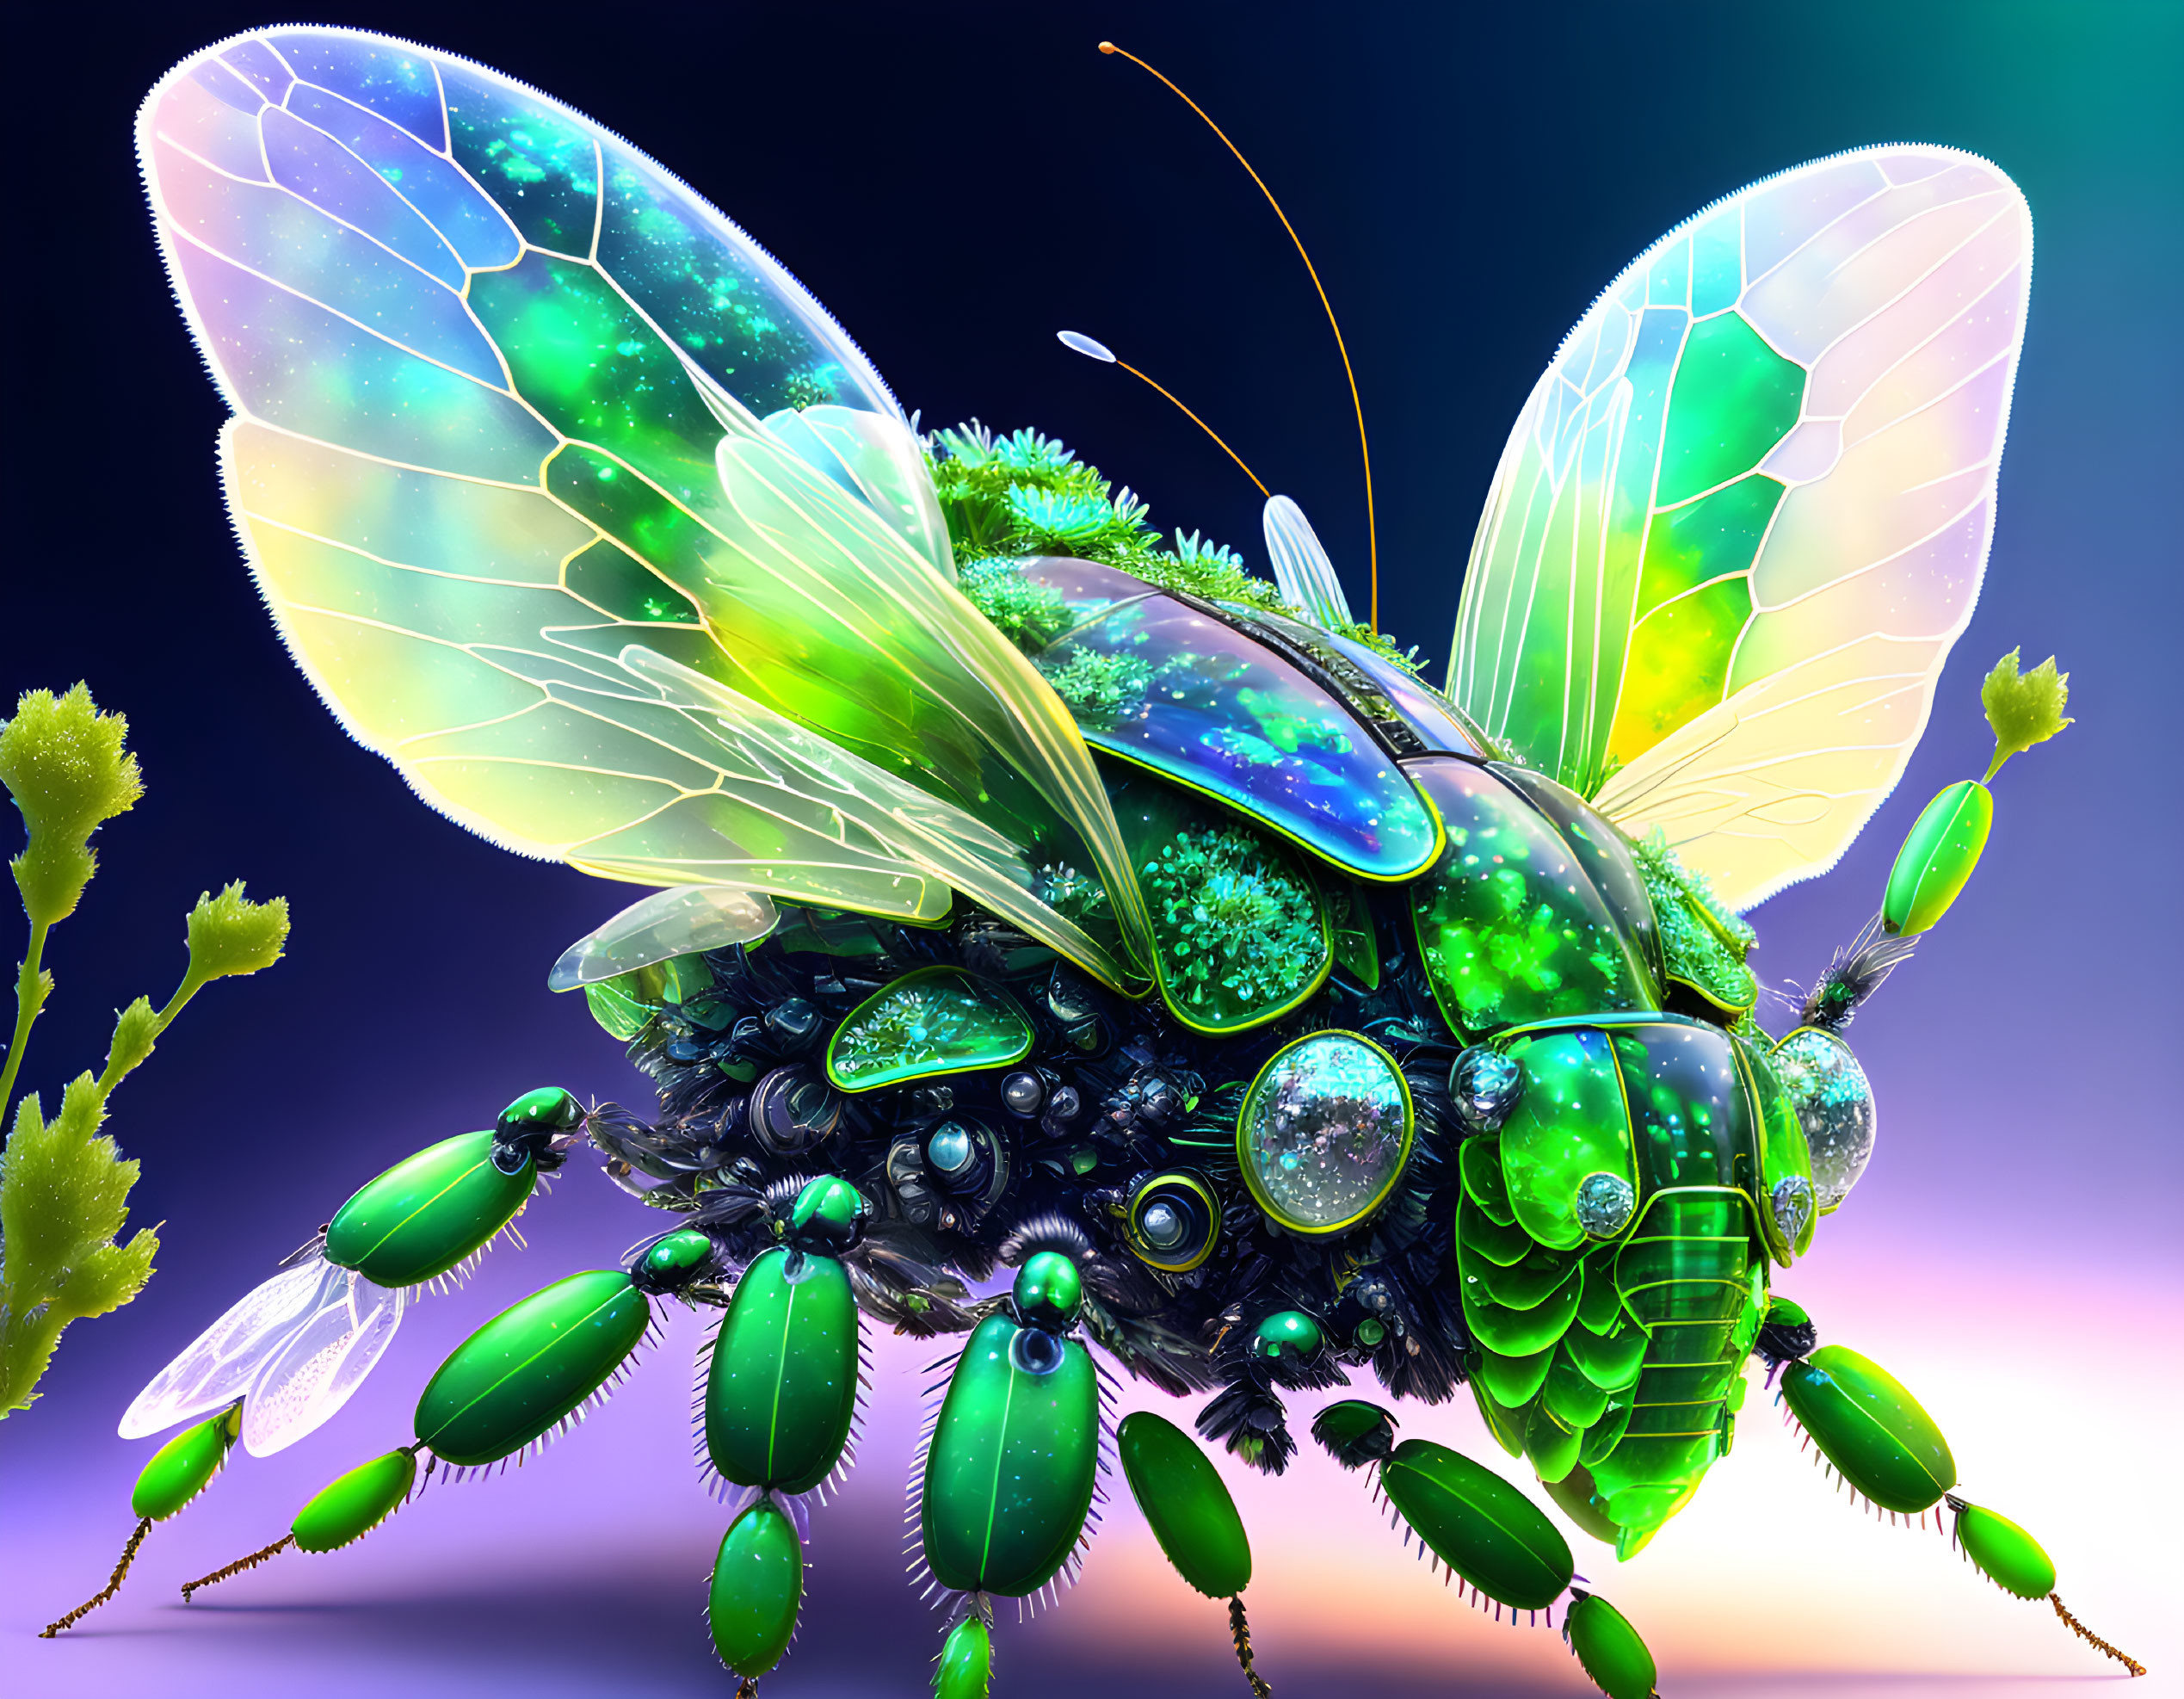 Colorful digital artwork of fantastical insect with iridescent wings and jewel-like body on gradient background